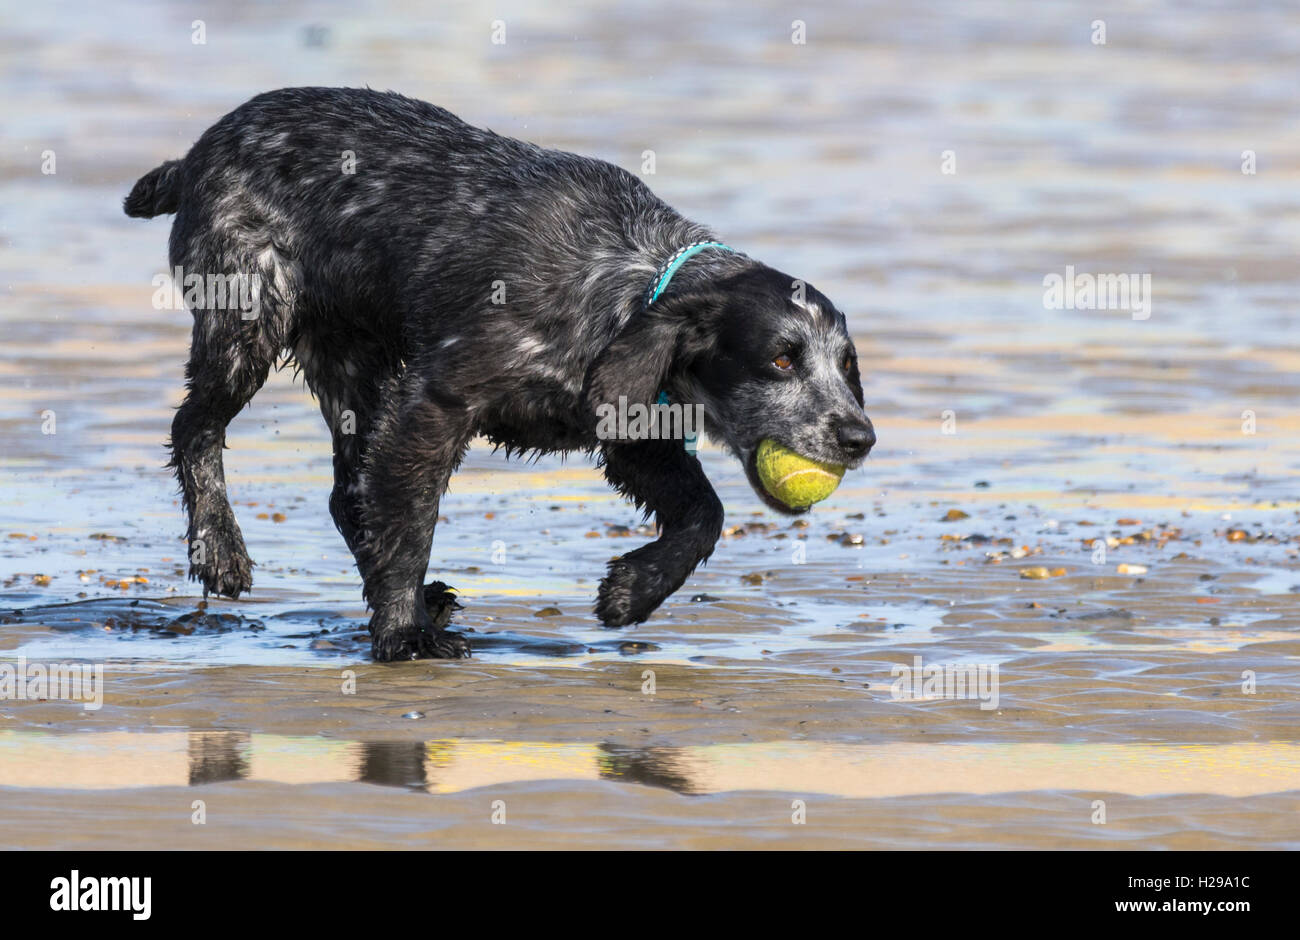 Black Pointer Mix dog playing with a ball on a beach. Stock Photo